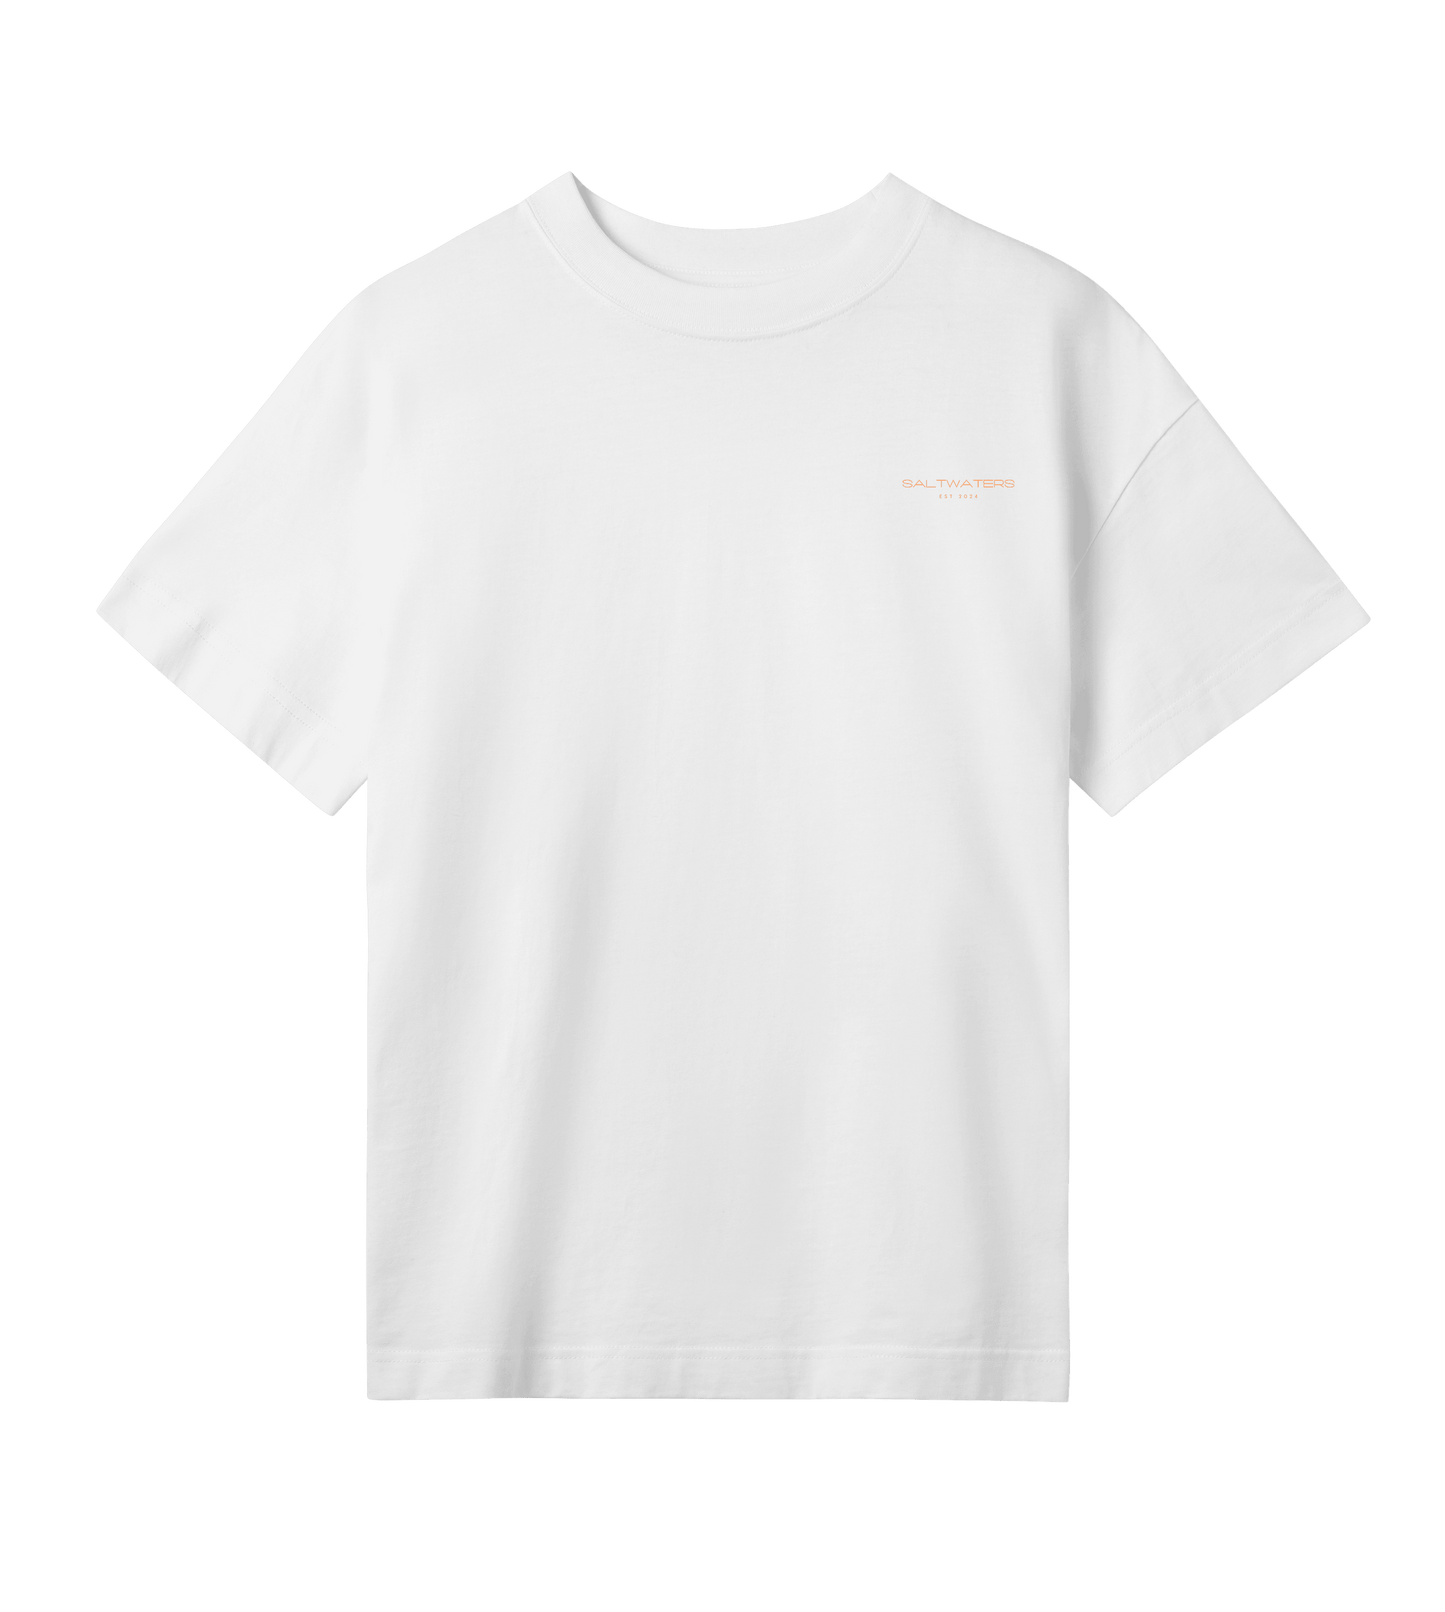 Saltwaters Off White/Sunset Oversized Womens Tee - Saltwaters Clothing